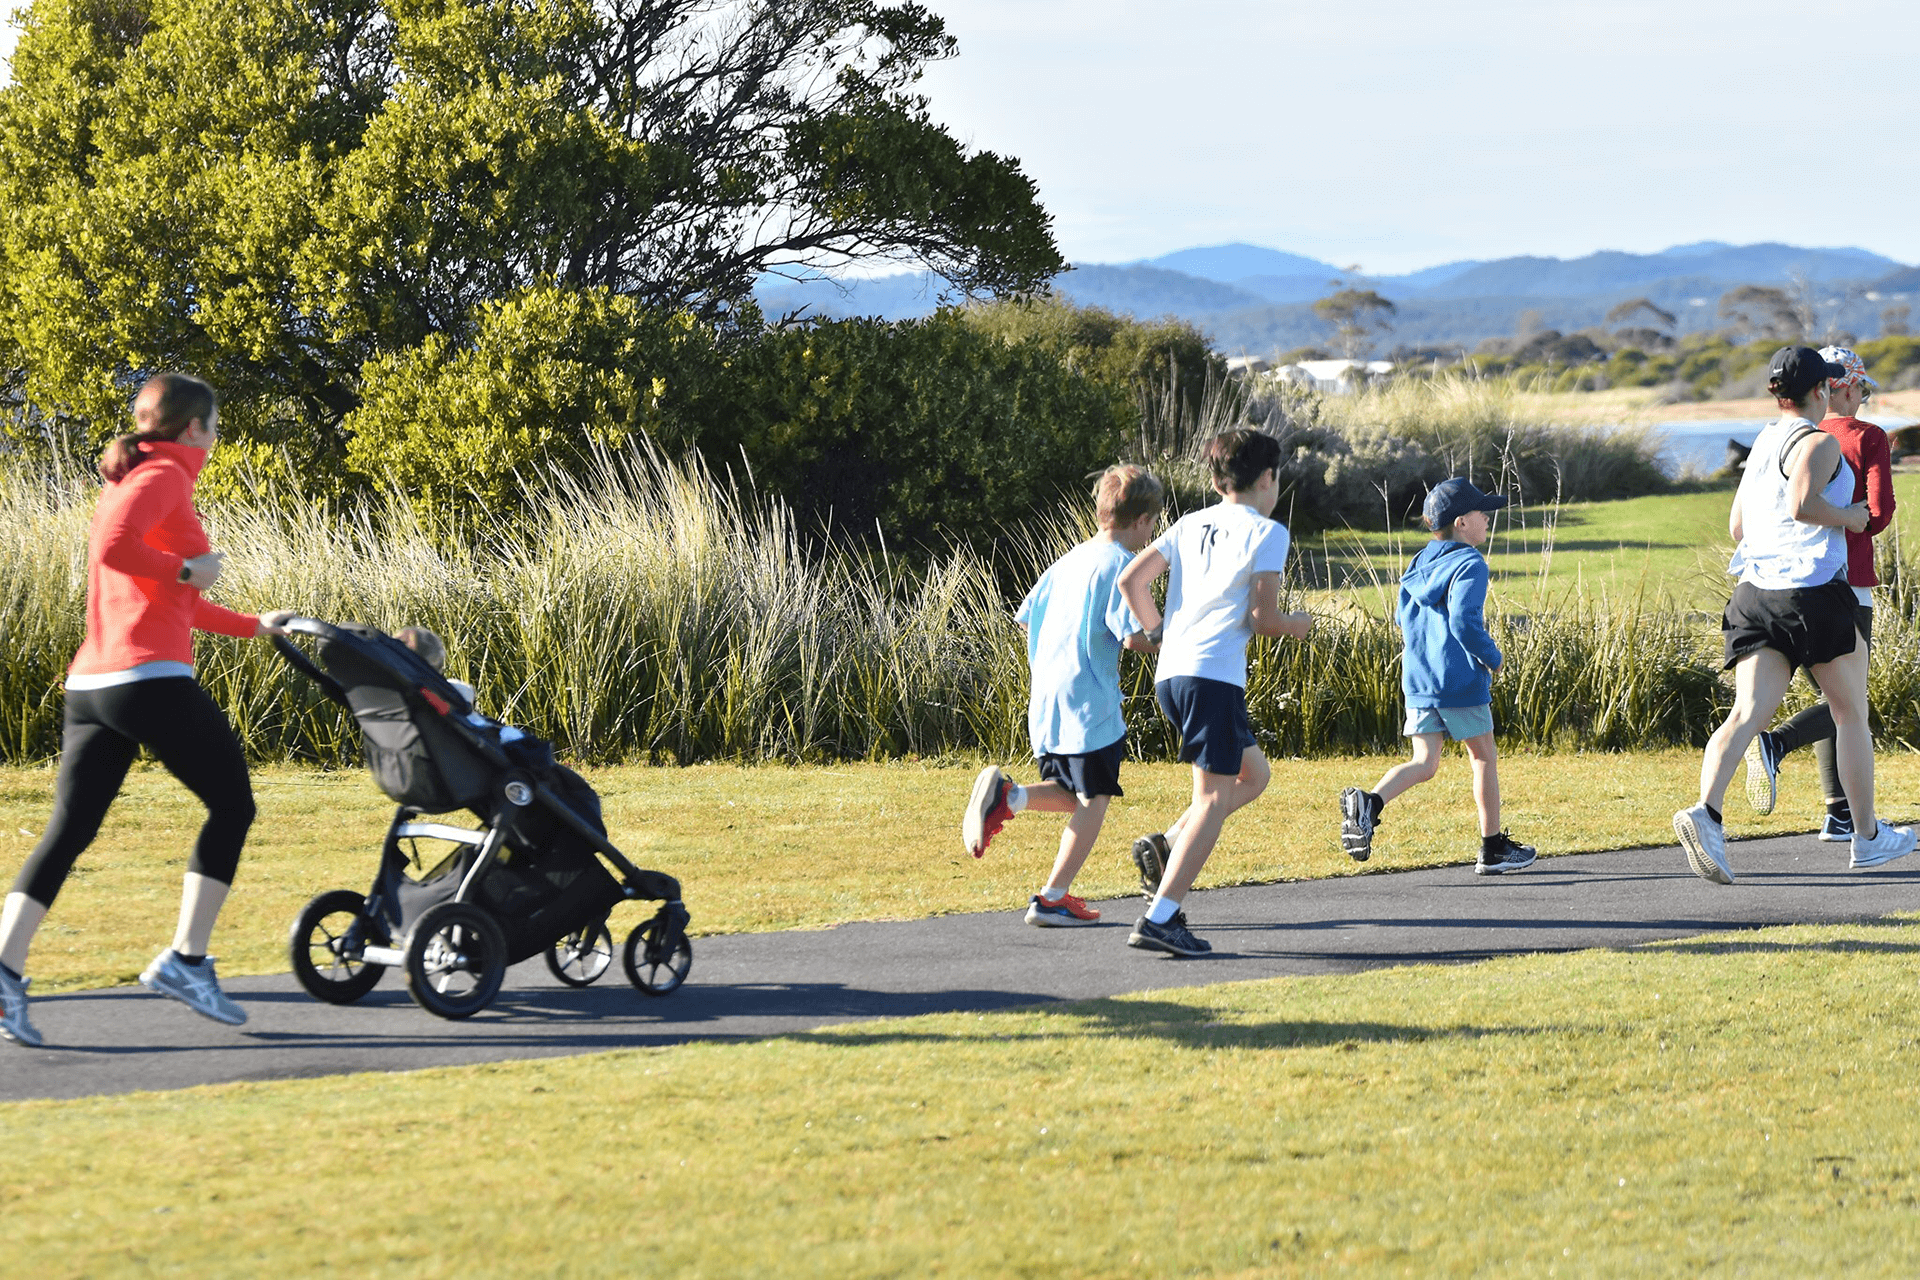 Children with adults pushing strollers running on path